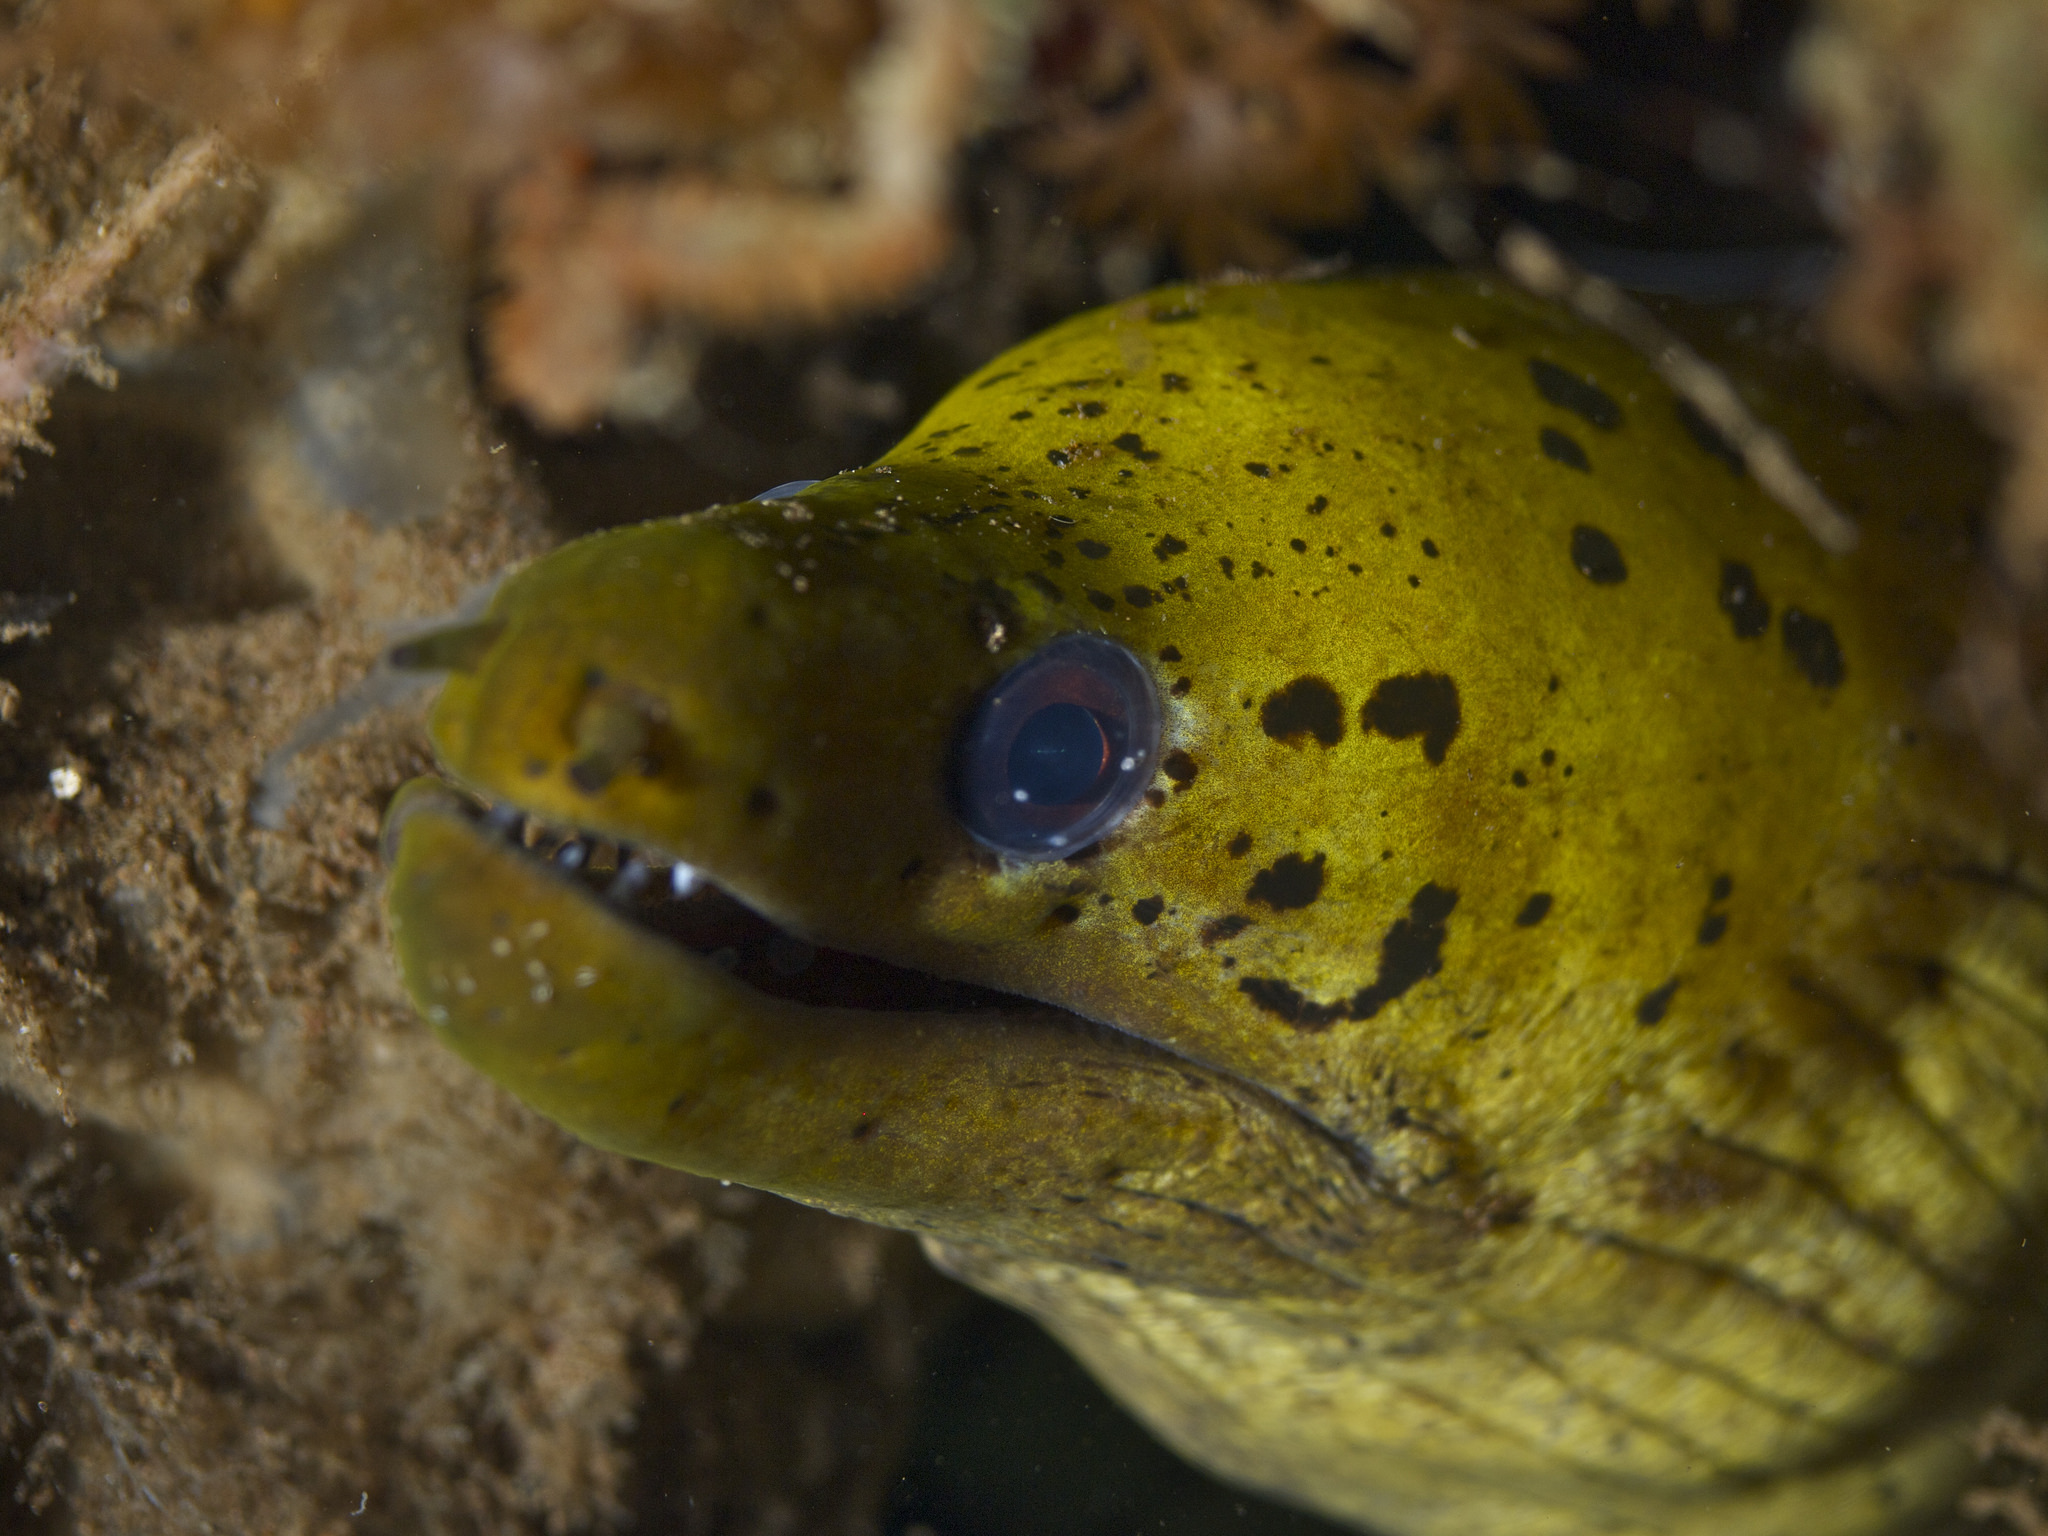 A fimbriated moray eel. Credit: elevy/Flickr, CC BY 2.0